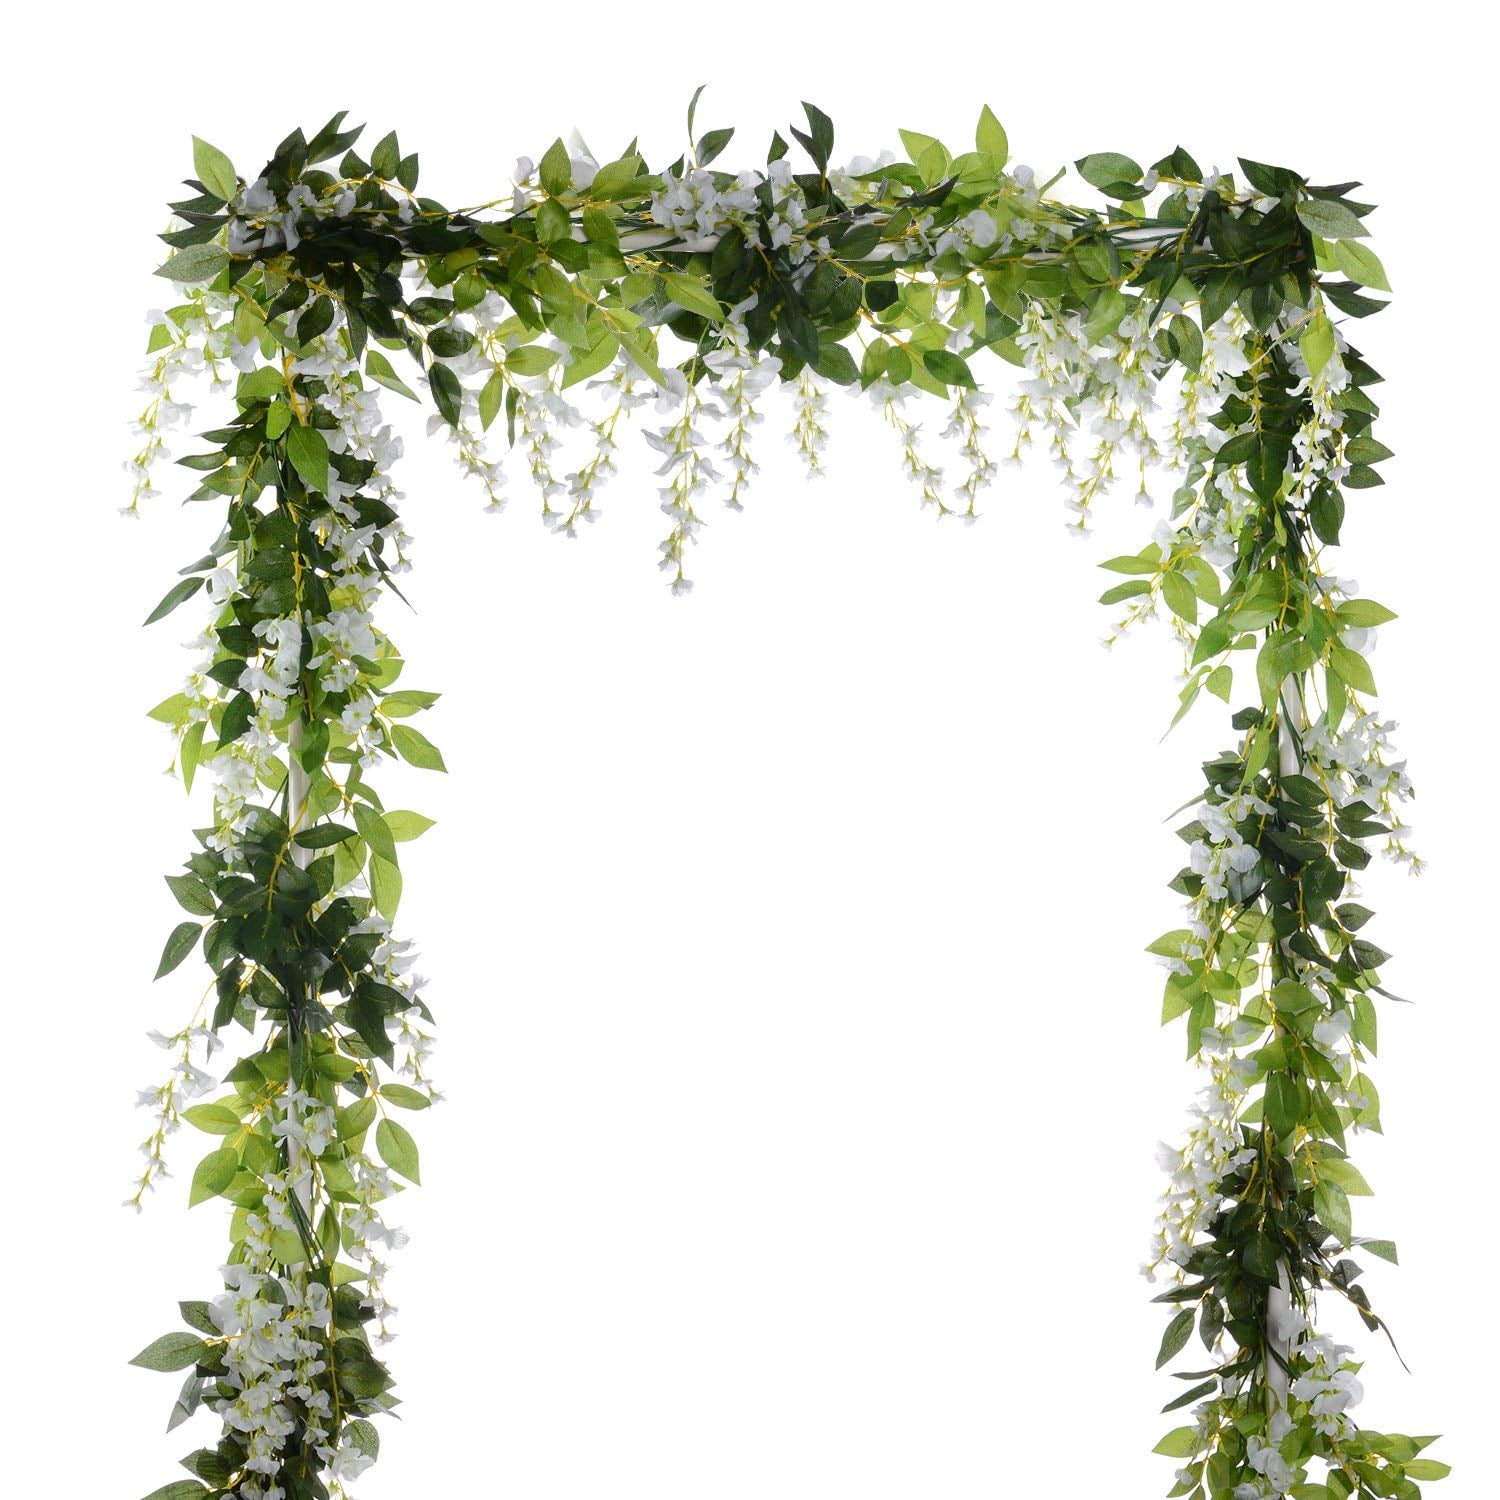 White DearHouse 12Pack 3.6 Feet/Piece Artificial Wisteria Vine Garland Hanging Wisteria Garland Silk Flowers String for Home Party Garden Wedding Decor